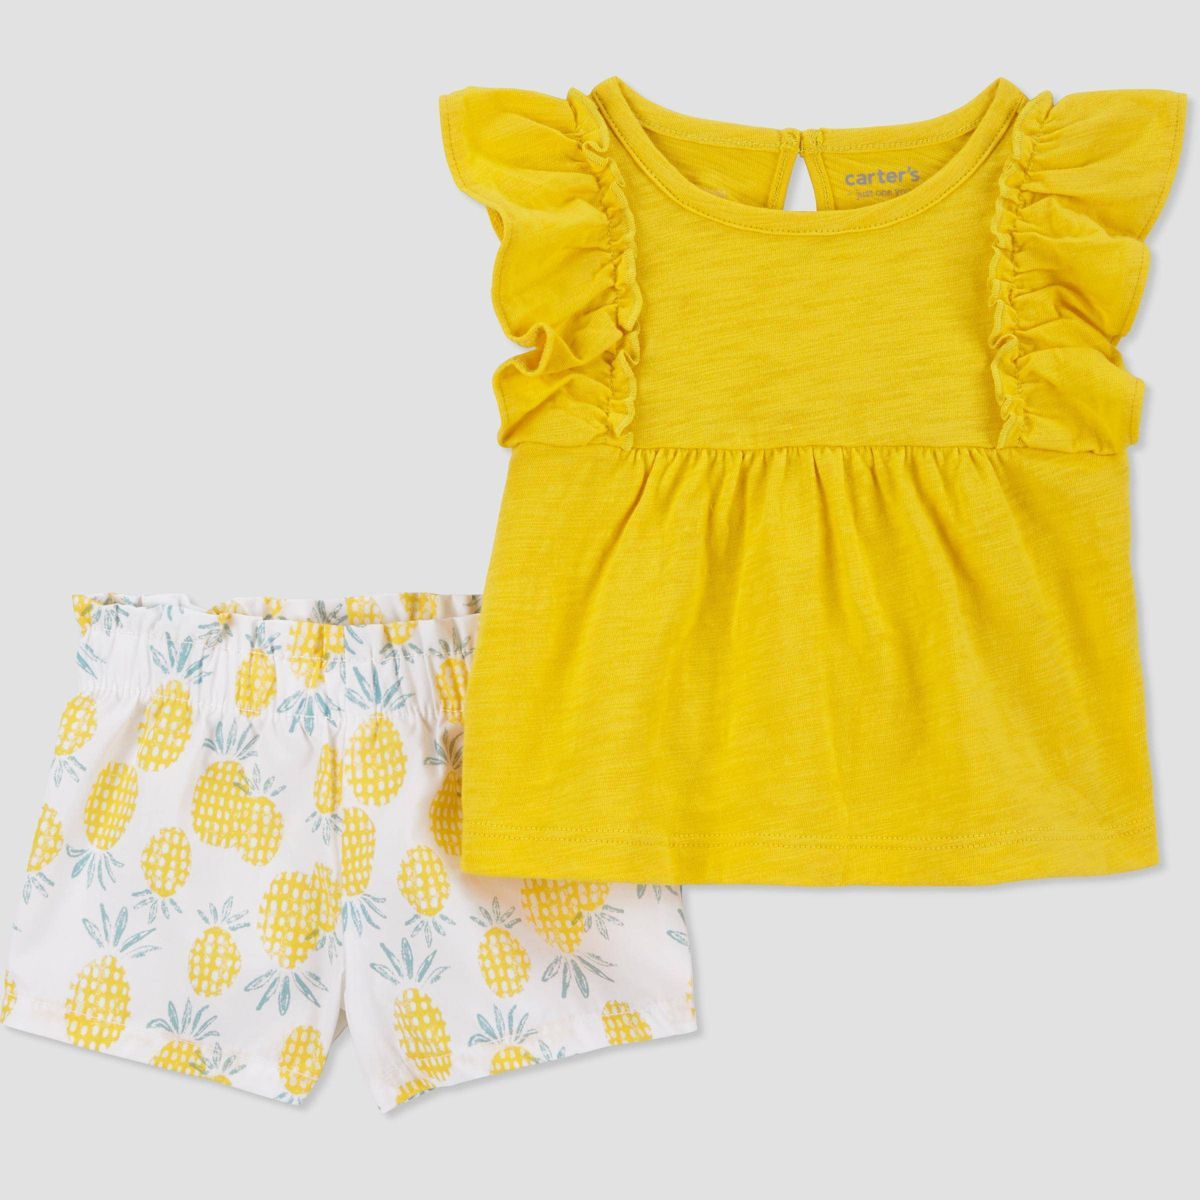 Carter's Just One You® Baby Girls' Pineapple Top & Bottom Set - Yellow | Target